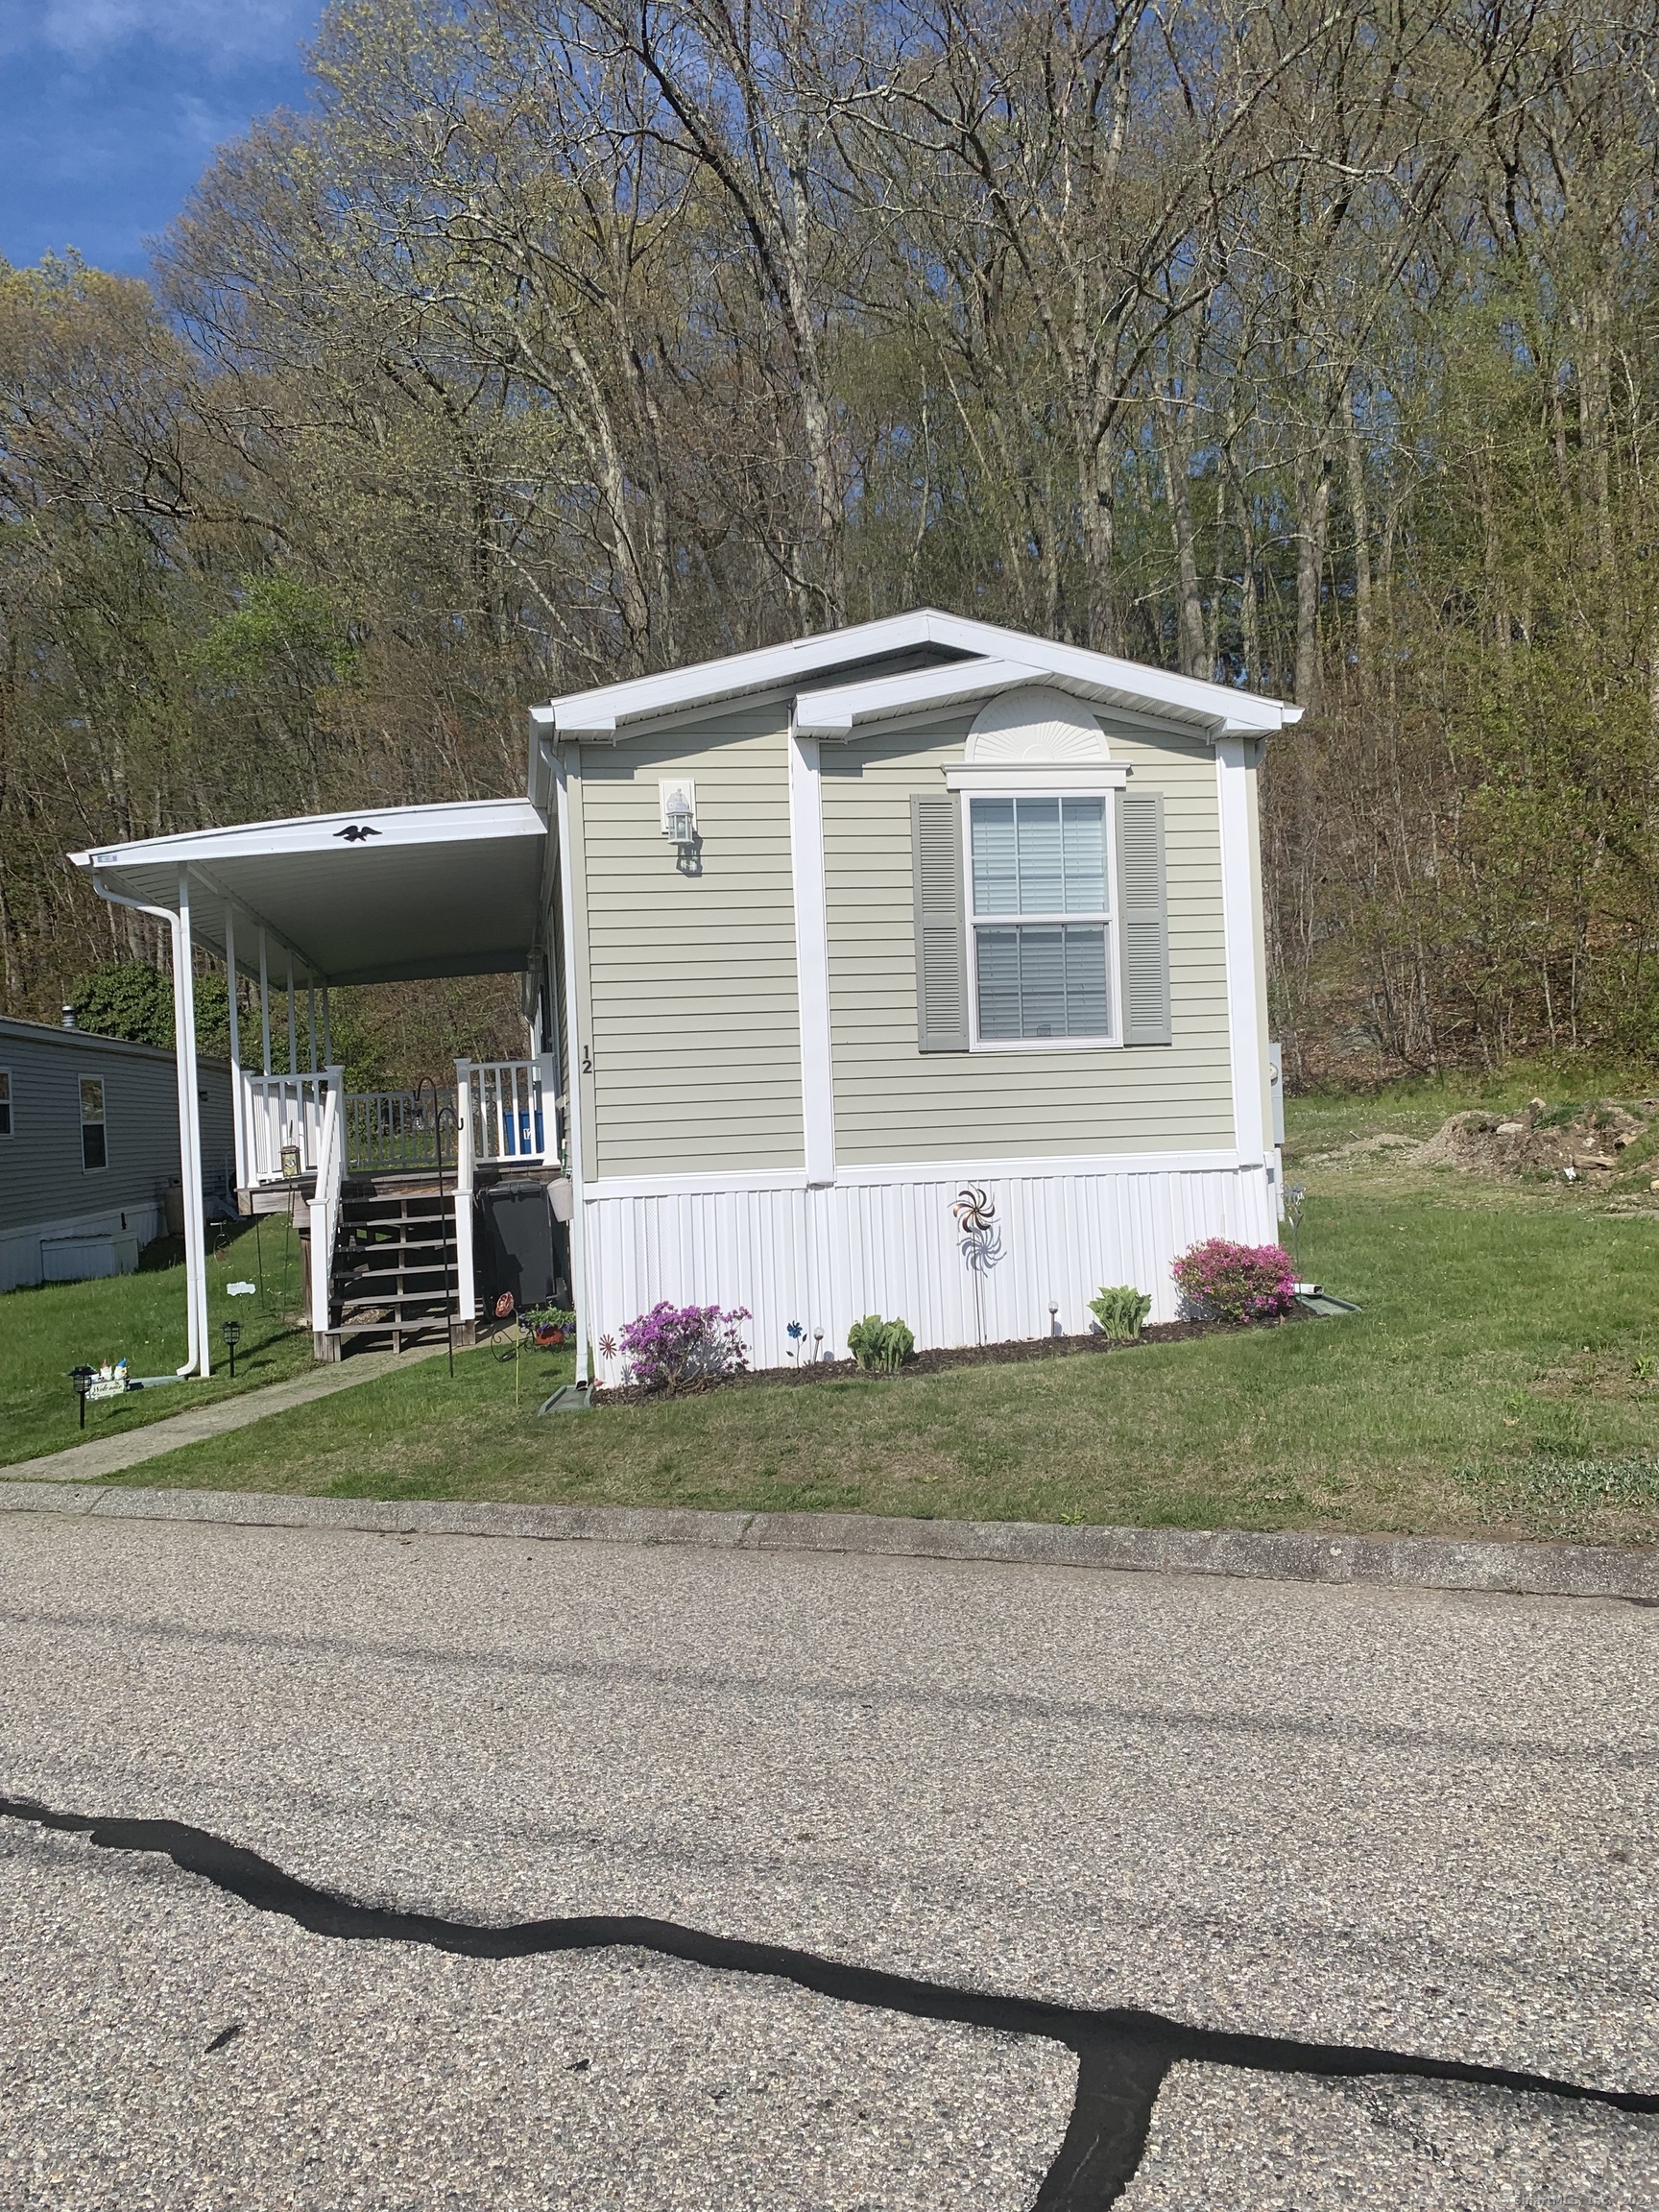 Property for Sale at 210 Bundy Hill Road Lot 12, Lisbon, Connecticut - Bedrooms: 2 
Bathrooms: 2 
Rooms: 4  - $89,900